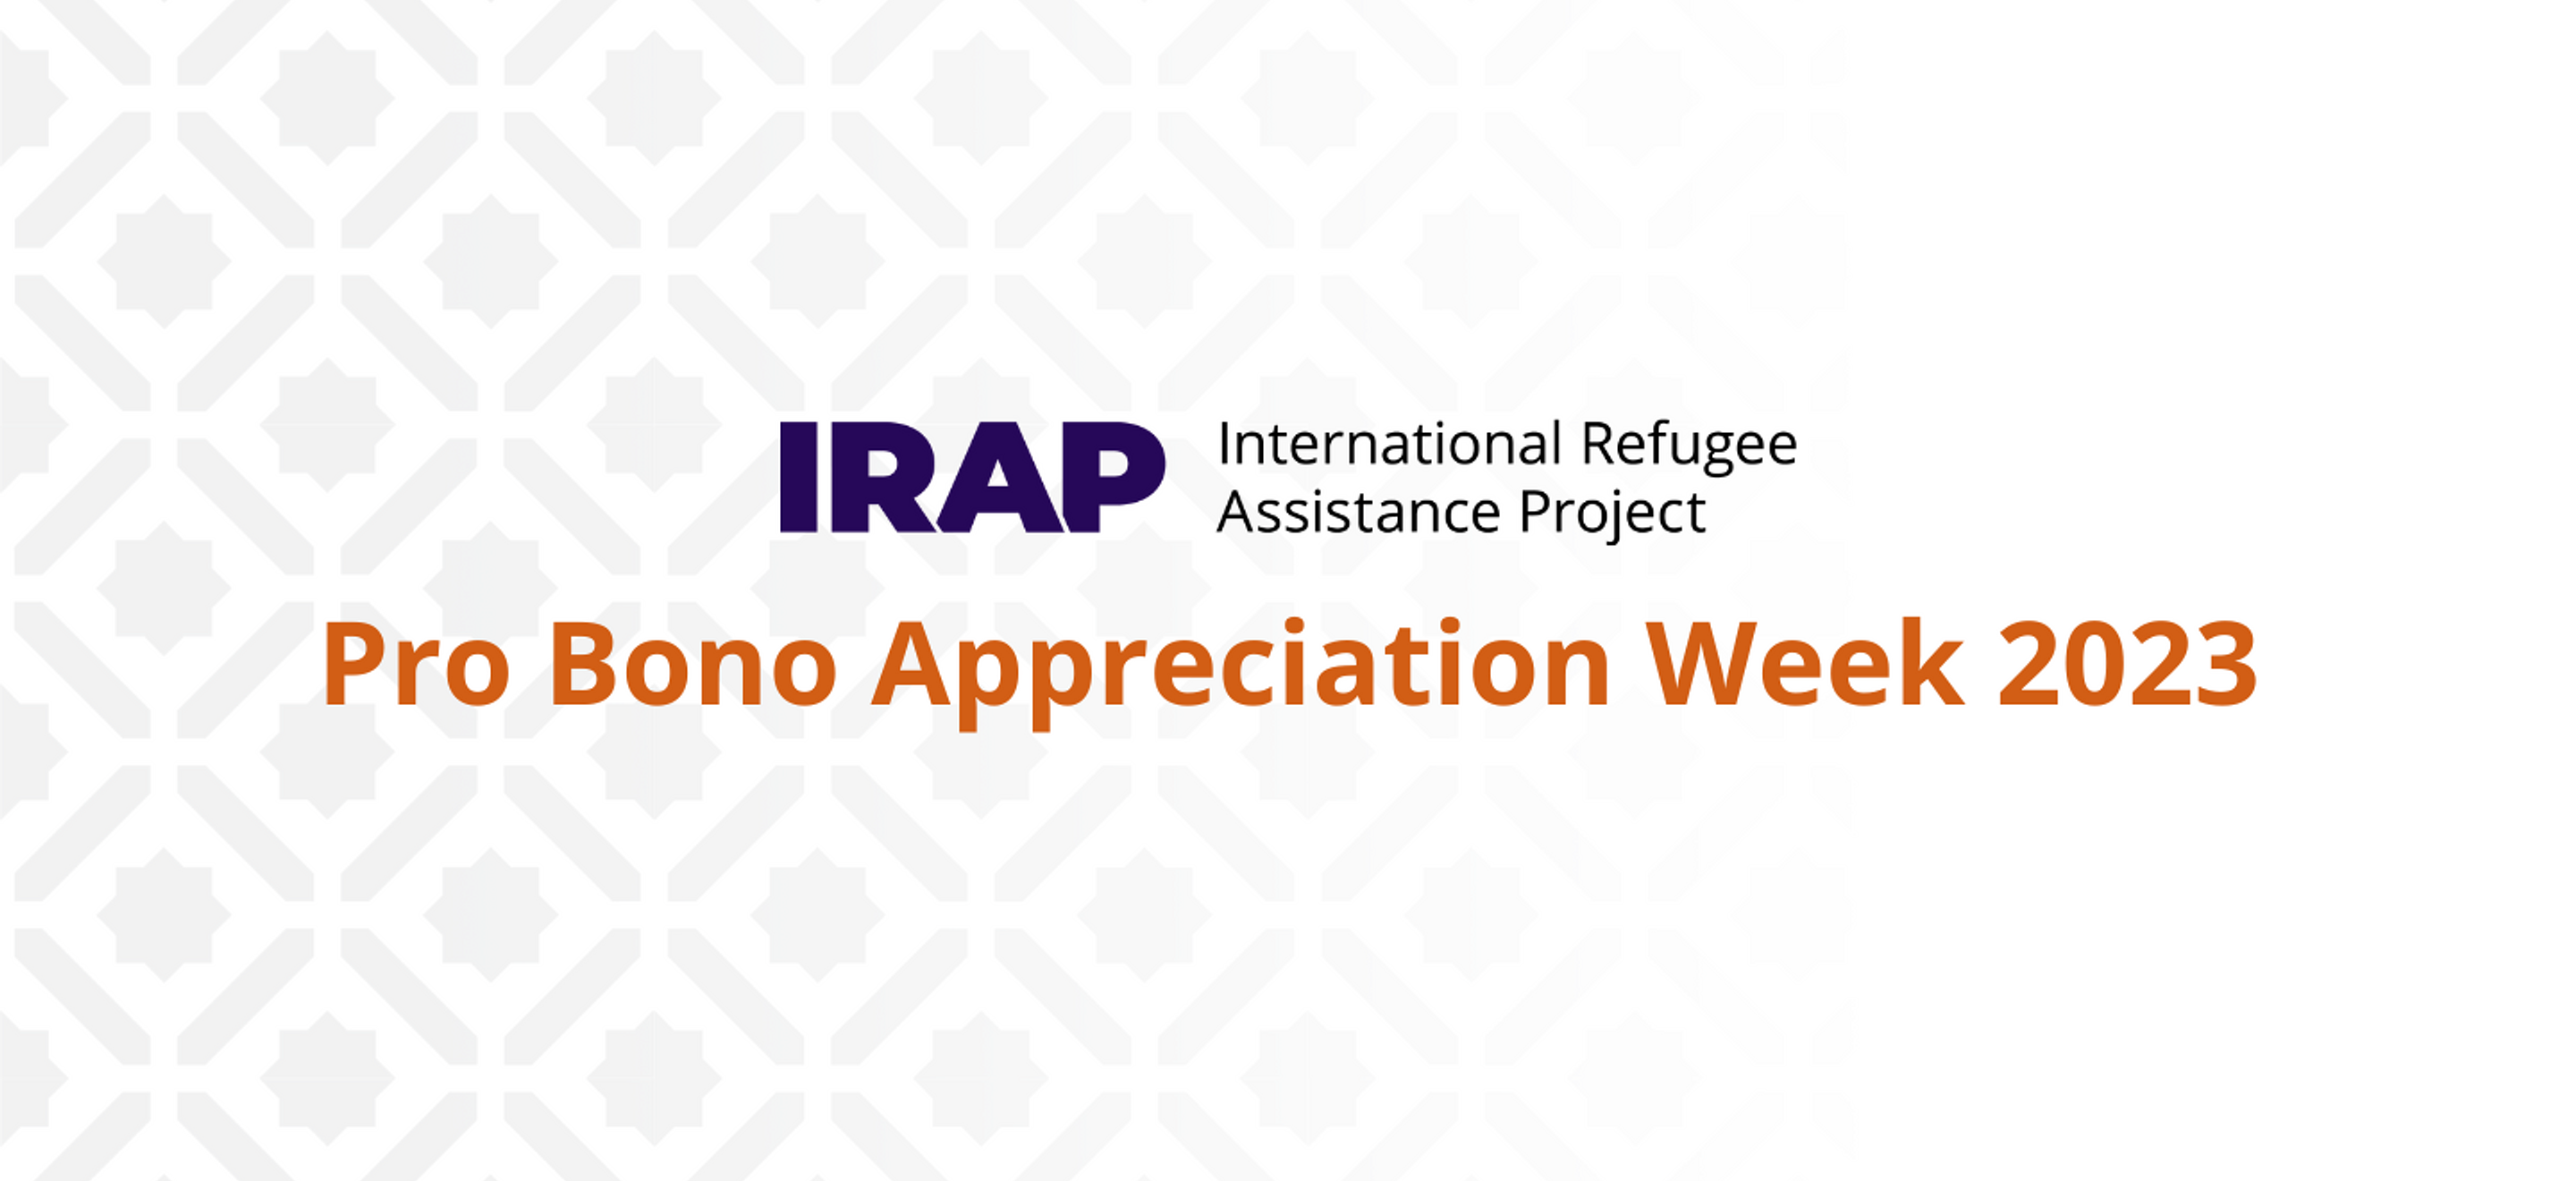 A graphic with the IRAP logo and the text Pro Bono Appreciation Week 2023